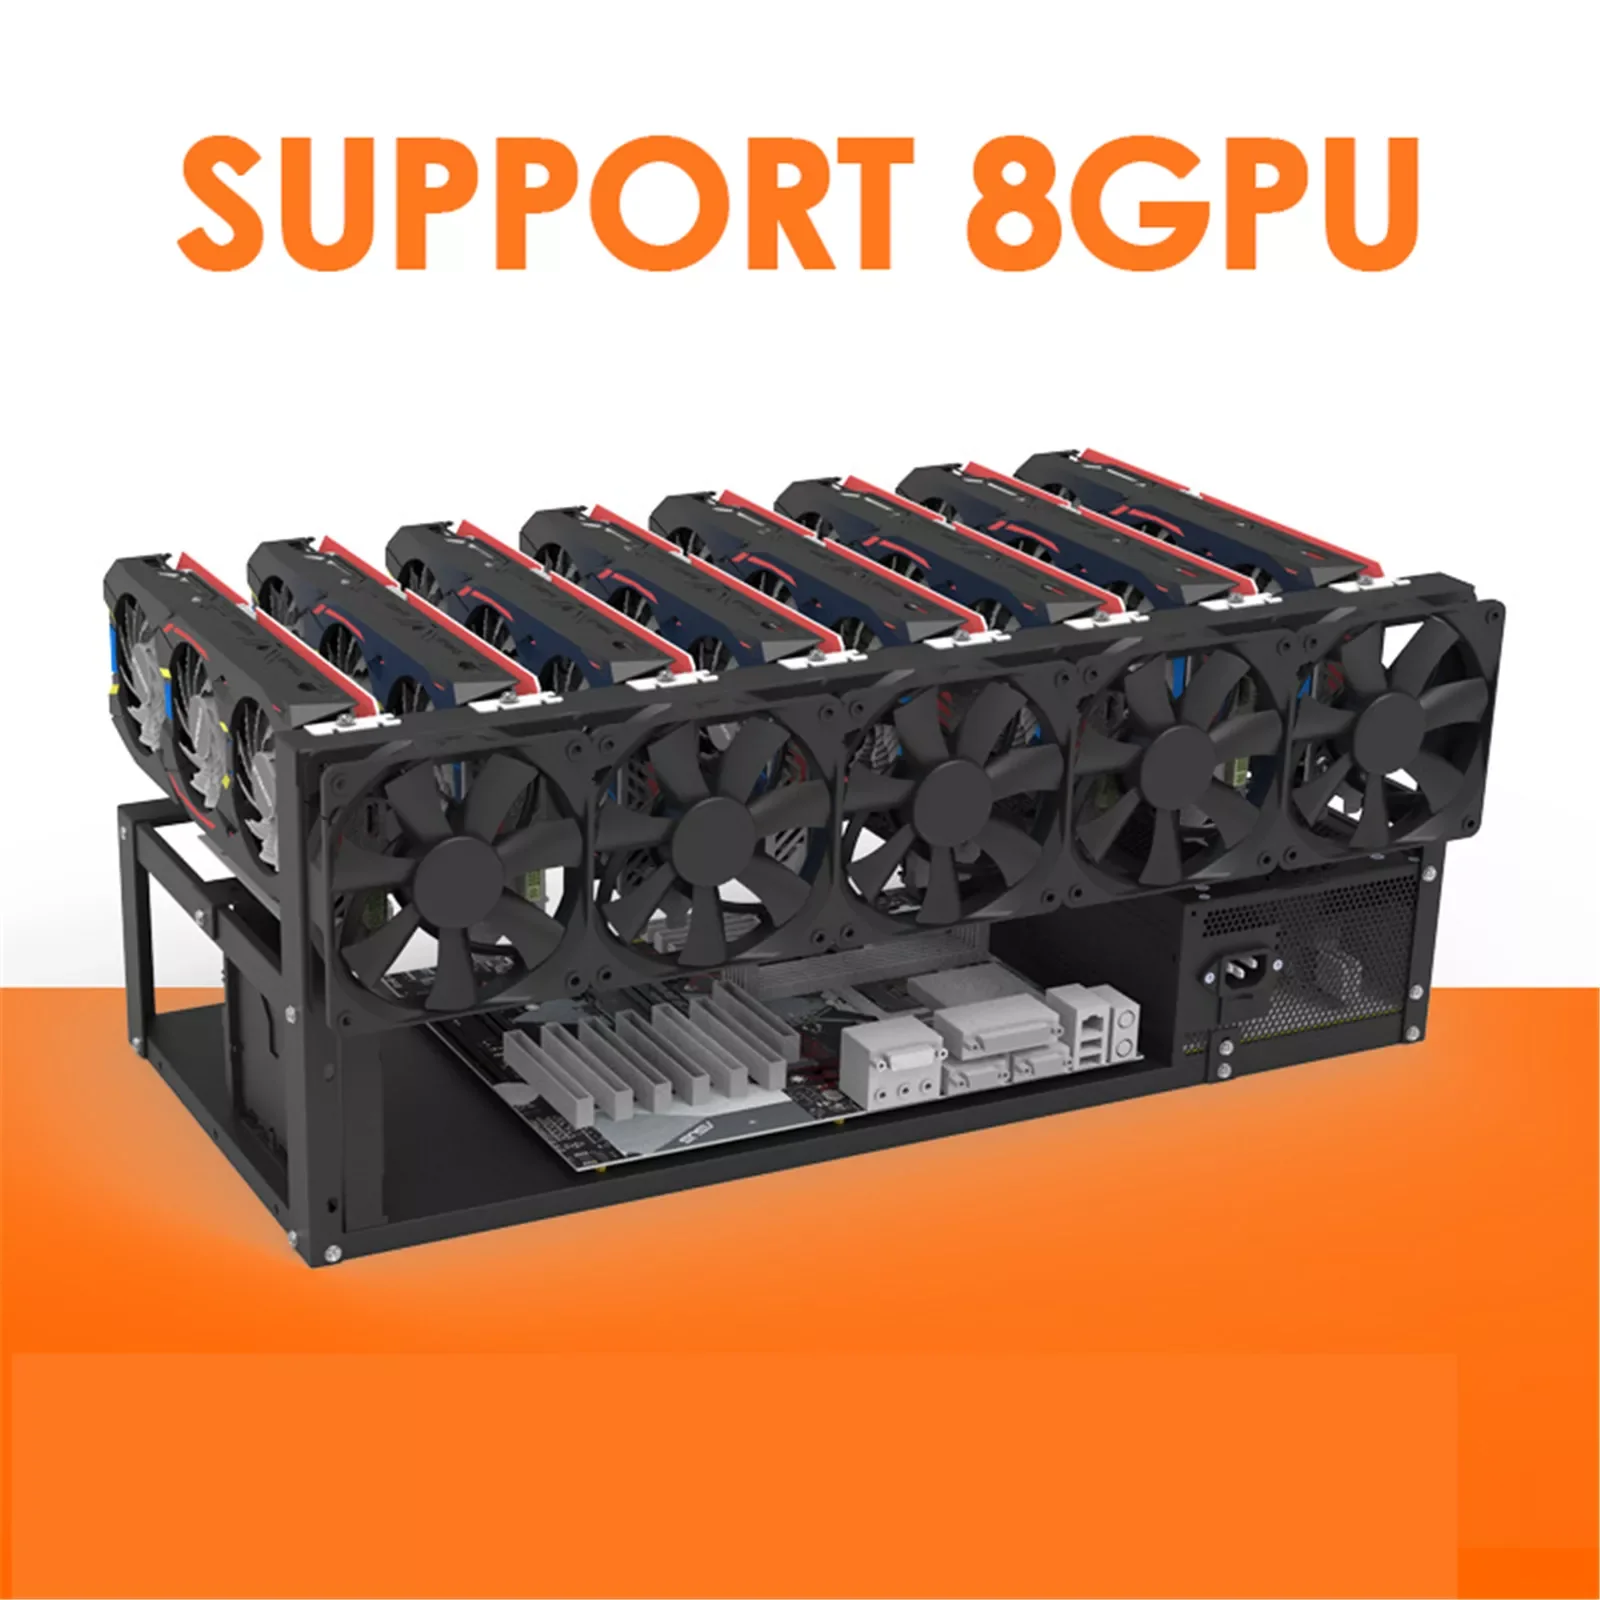 Mining Machine Frame Mining Rig Frame Case Graphics Card Bracket Holds 8GPU Mining for Crypto Coin Currency Bitcoin Mining